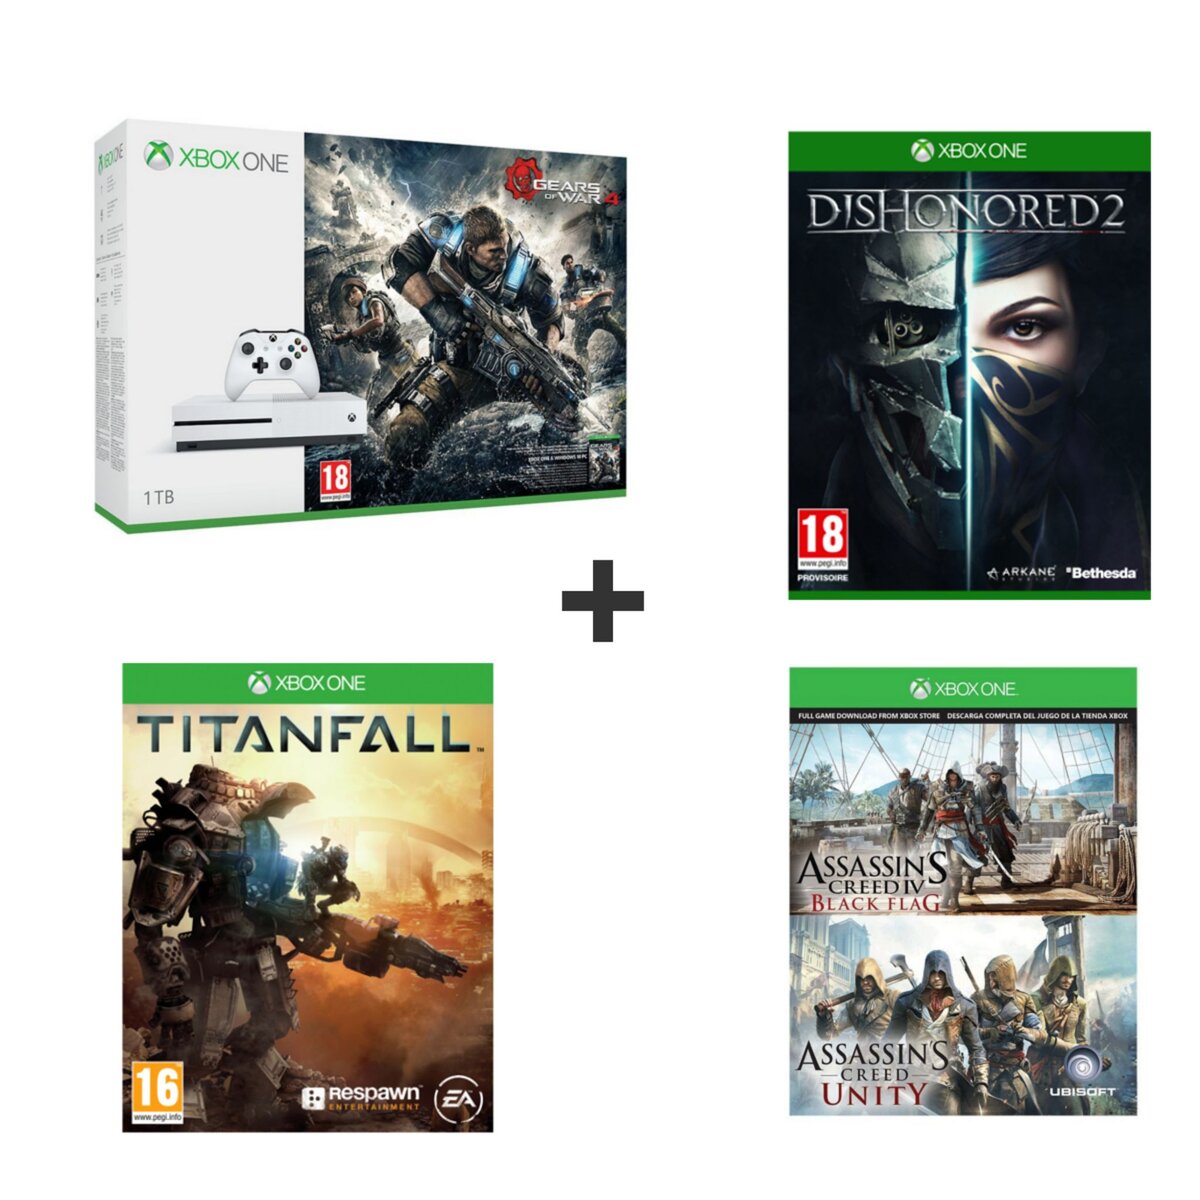 EXCLU WEB Console  Xbox One S 1To Pack G ears of War 4 + DISHONORED2  + TITANFALL 1 + CARTE DEMAT ASSASSIN'S CREED BLACK FLAG & UNITY